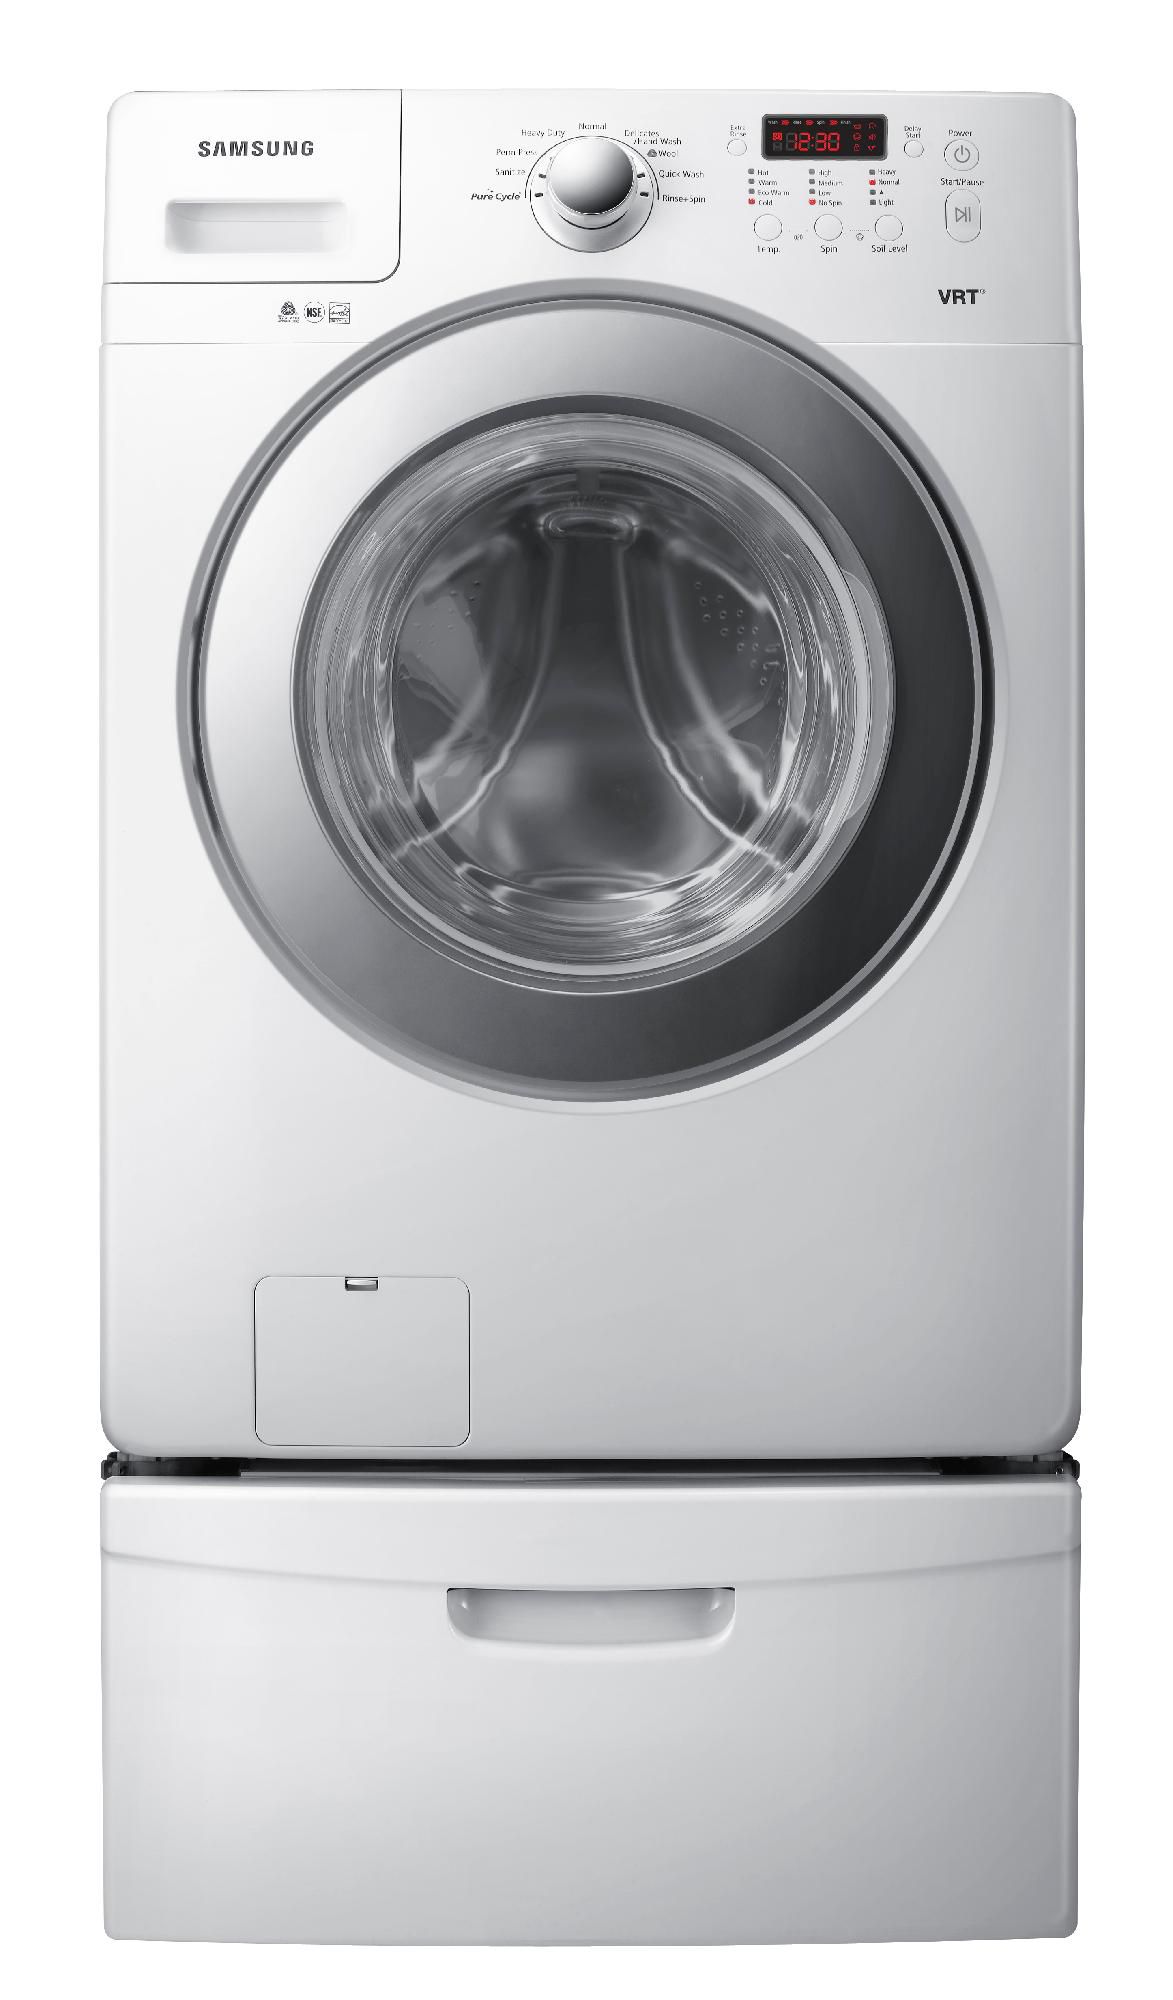 Samsung 3.5 cu. ft. High-Efficiency Front-Load Washer, White